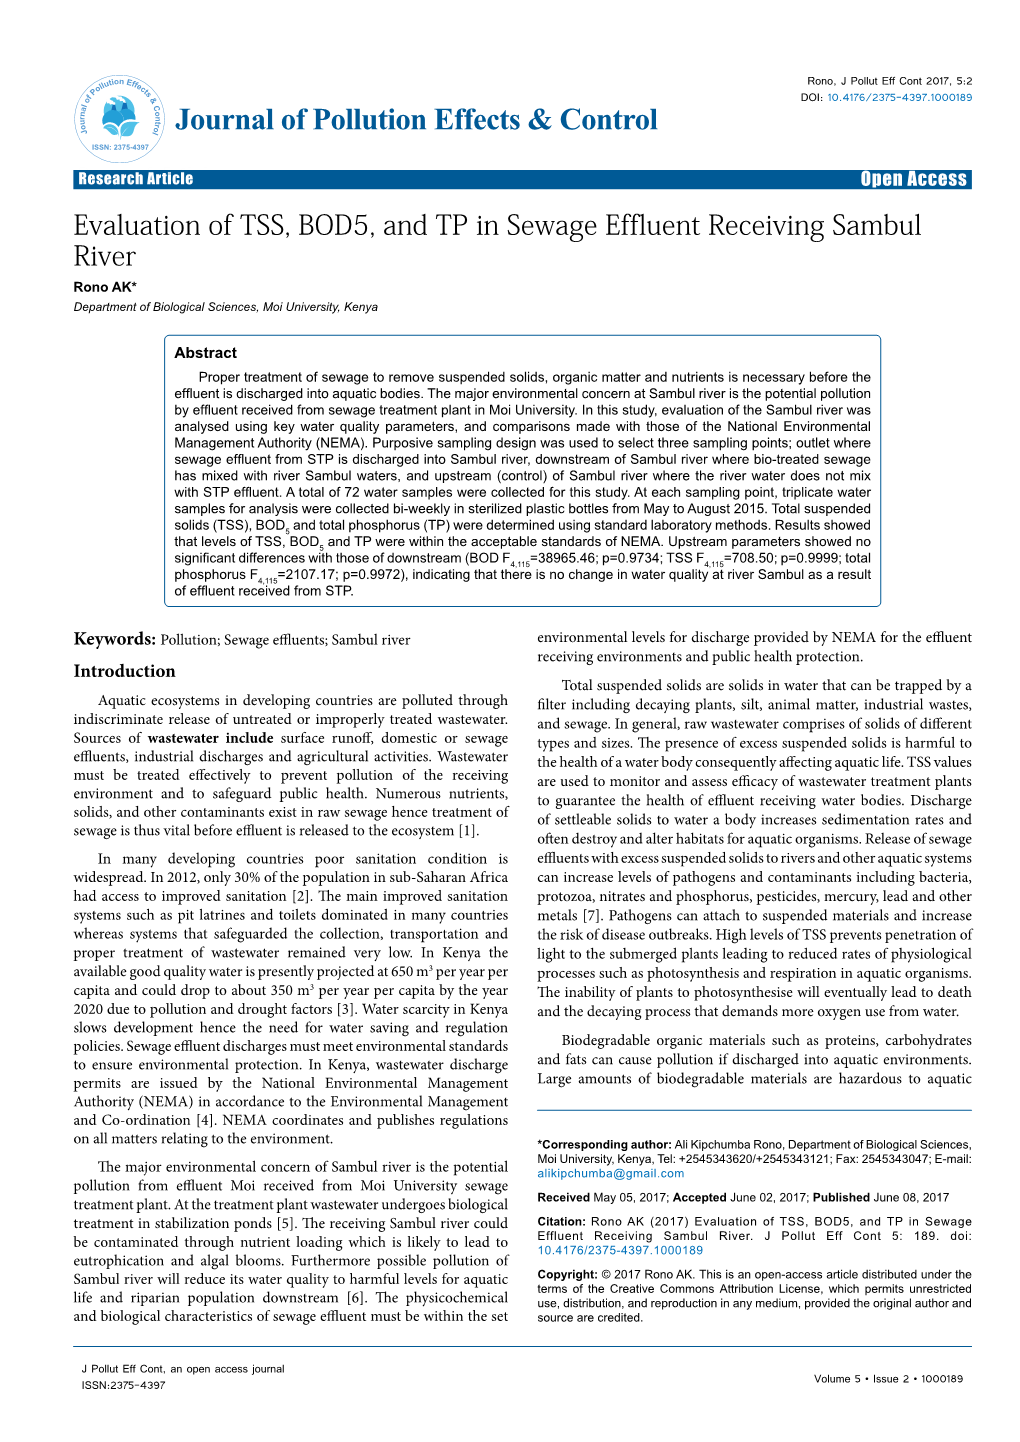 Evaluation of TSS, BOD5, and TP in Sewage Effluent Receiving Sambul River Rono AK* Department of Biological Sciences, Moi University, Kenya